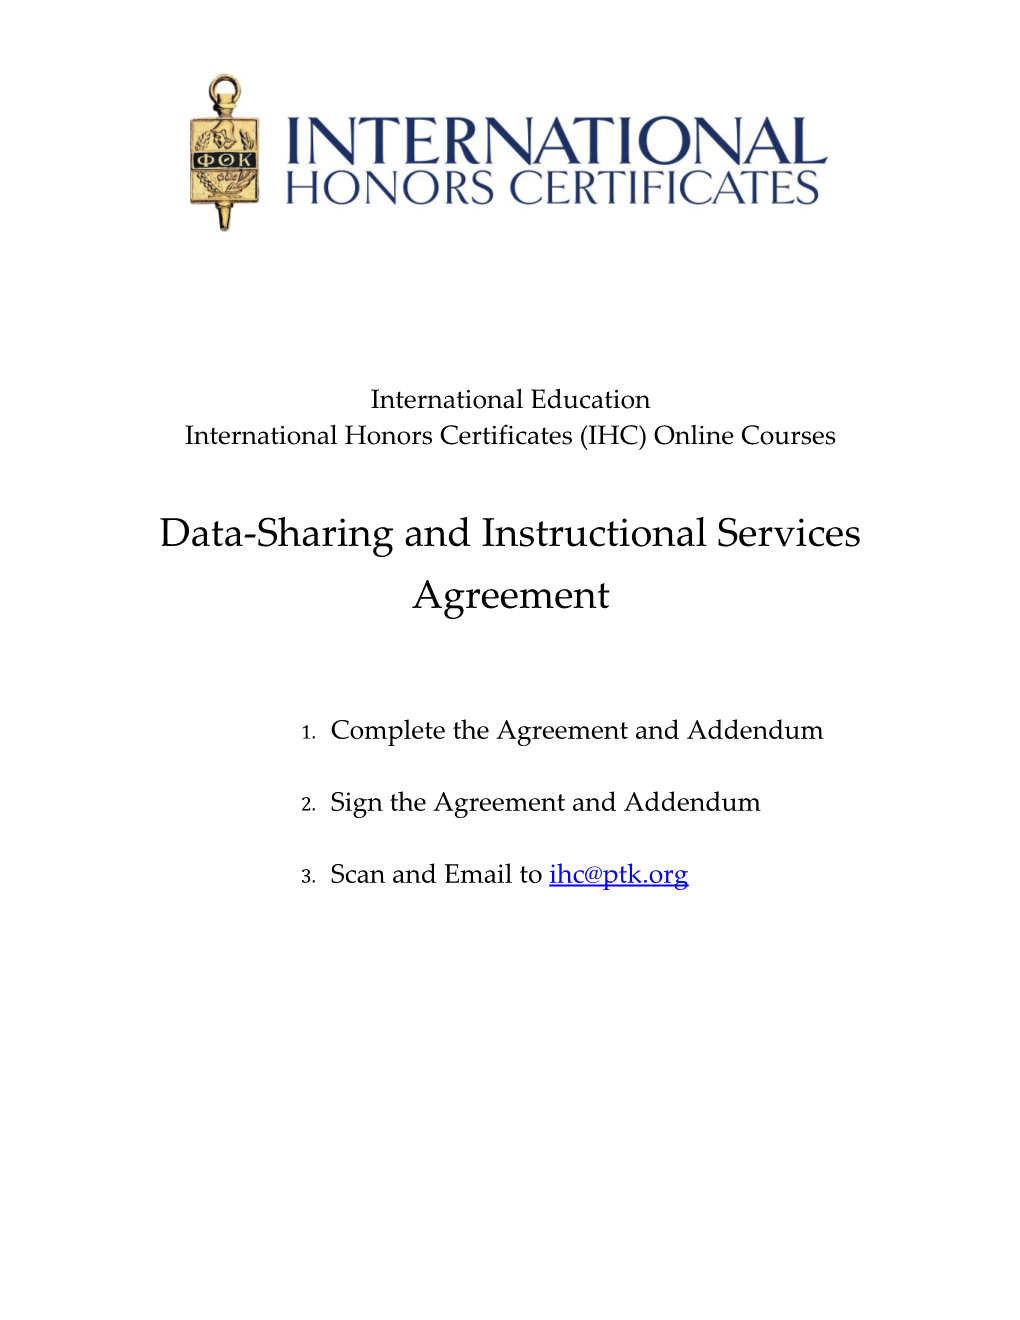 International Honors Certificates (IHC) Online Courses